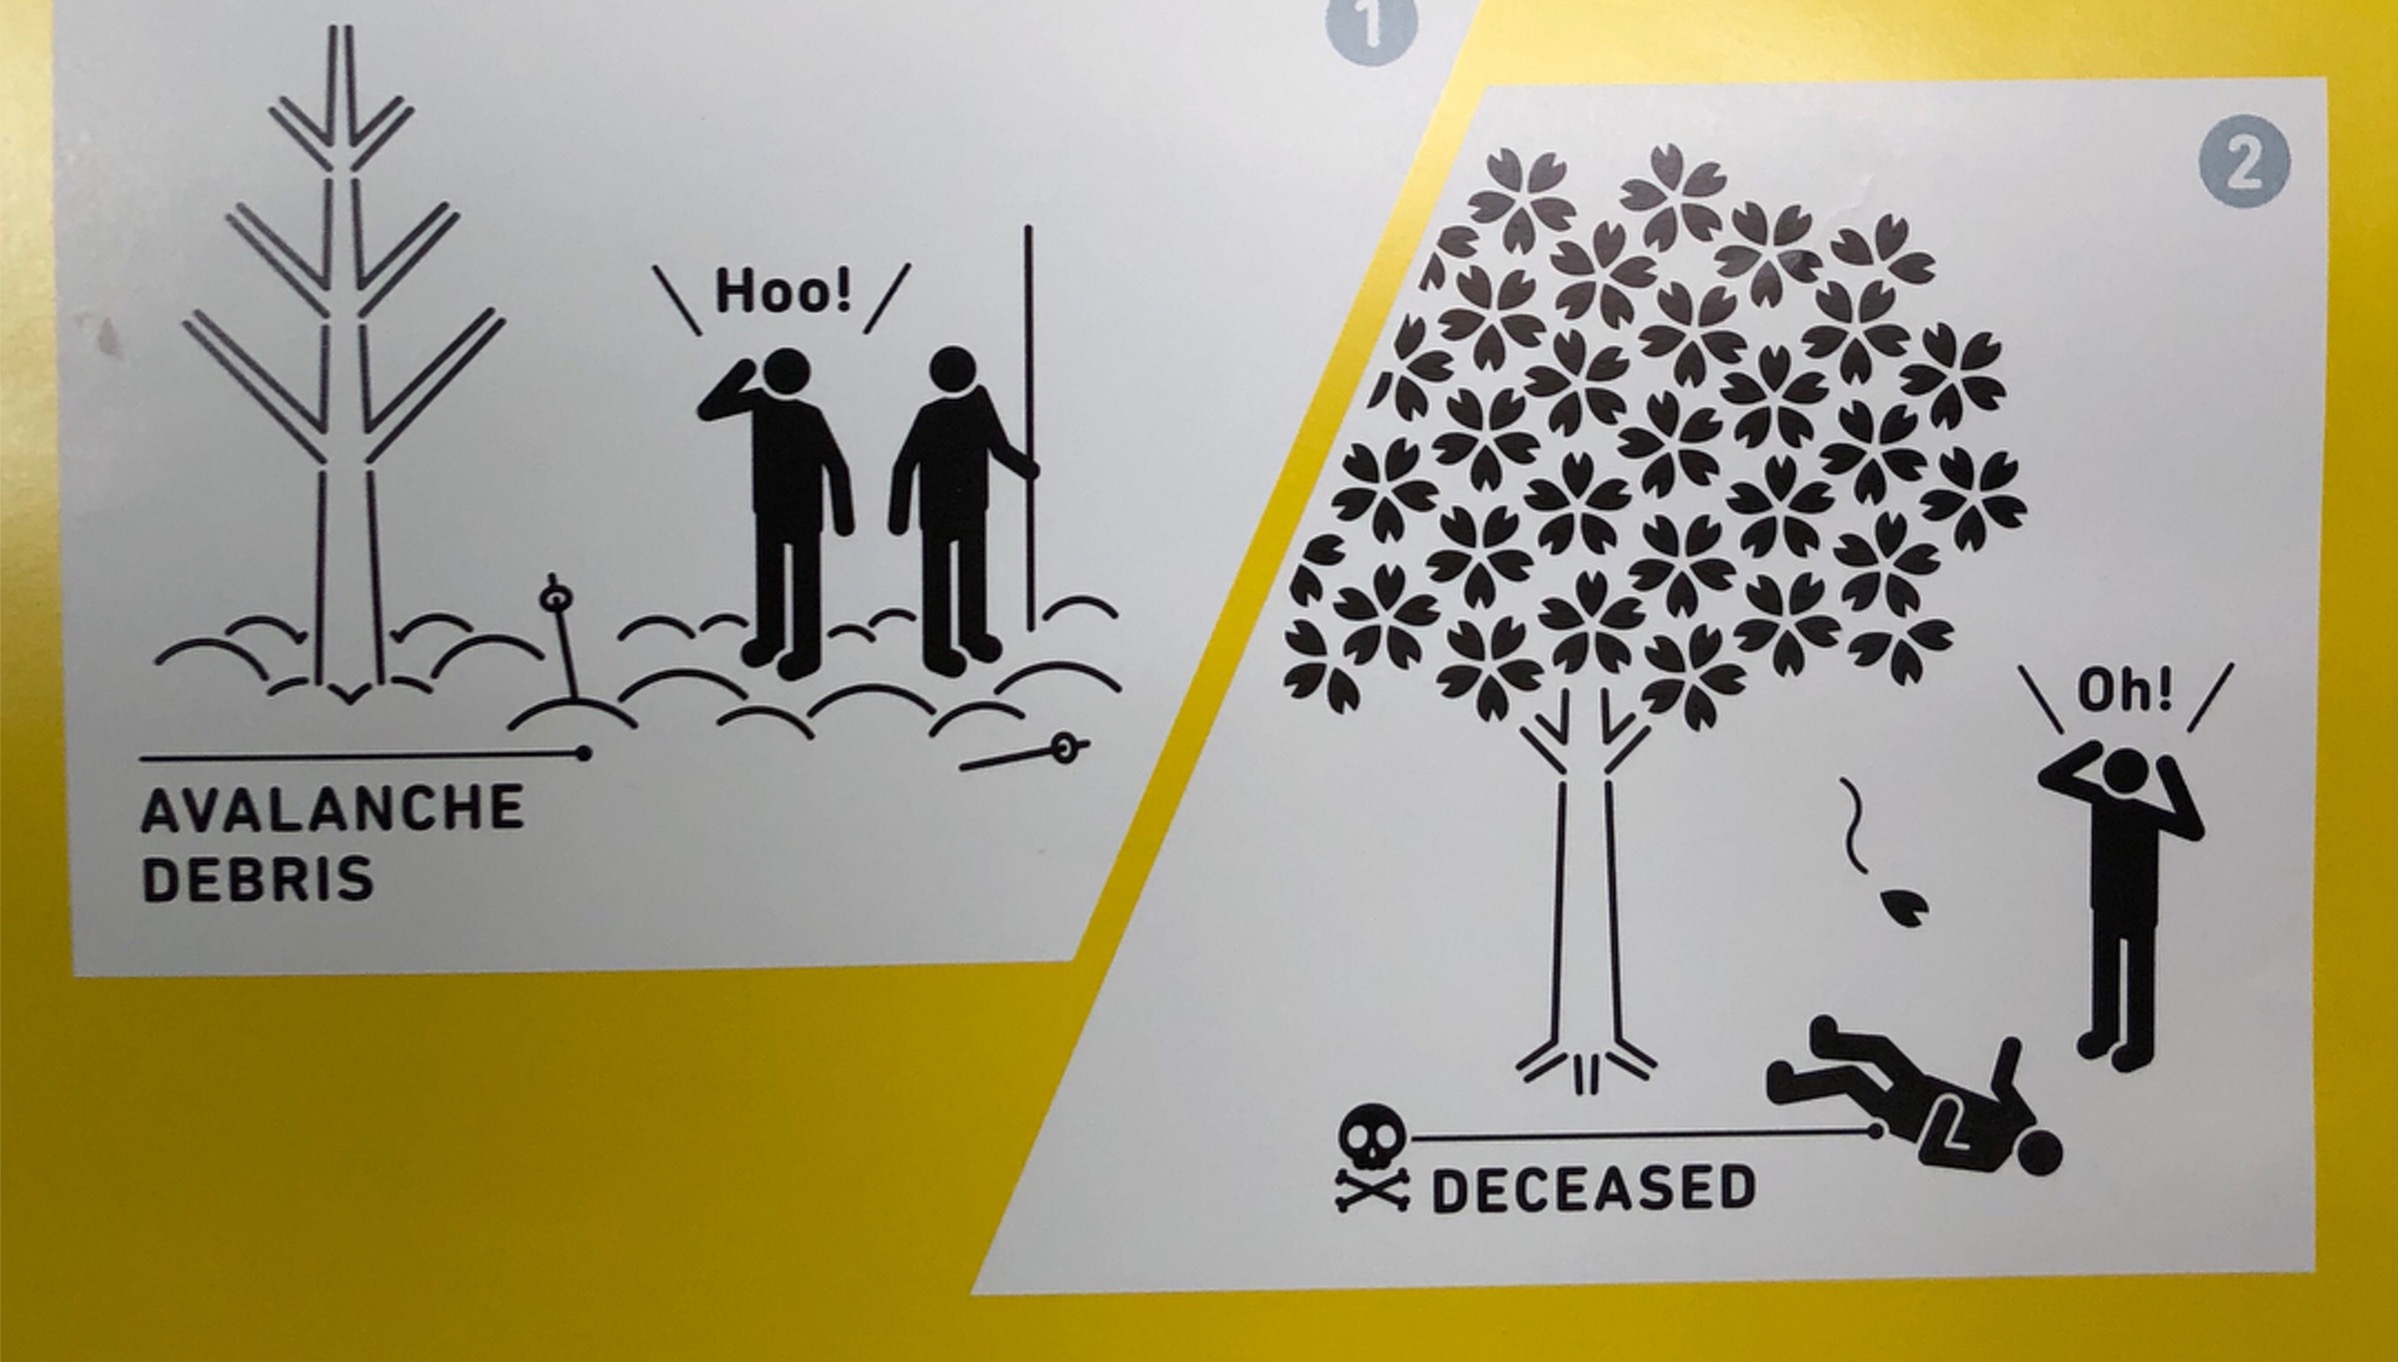 These Japanese Ski Safety Signs Are Weird / Funny / Morbid AF! | Unofficial  Networks